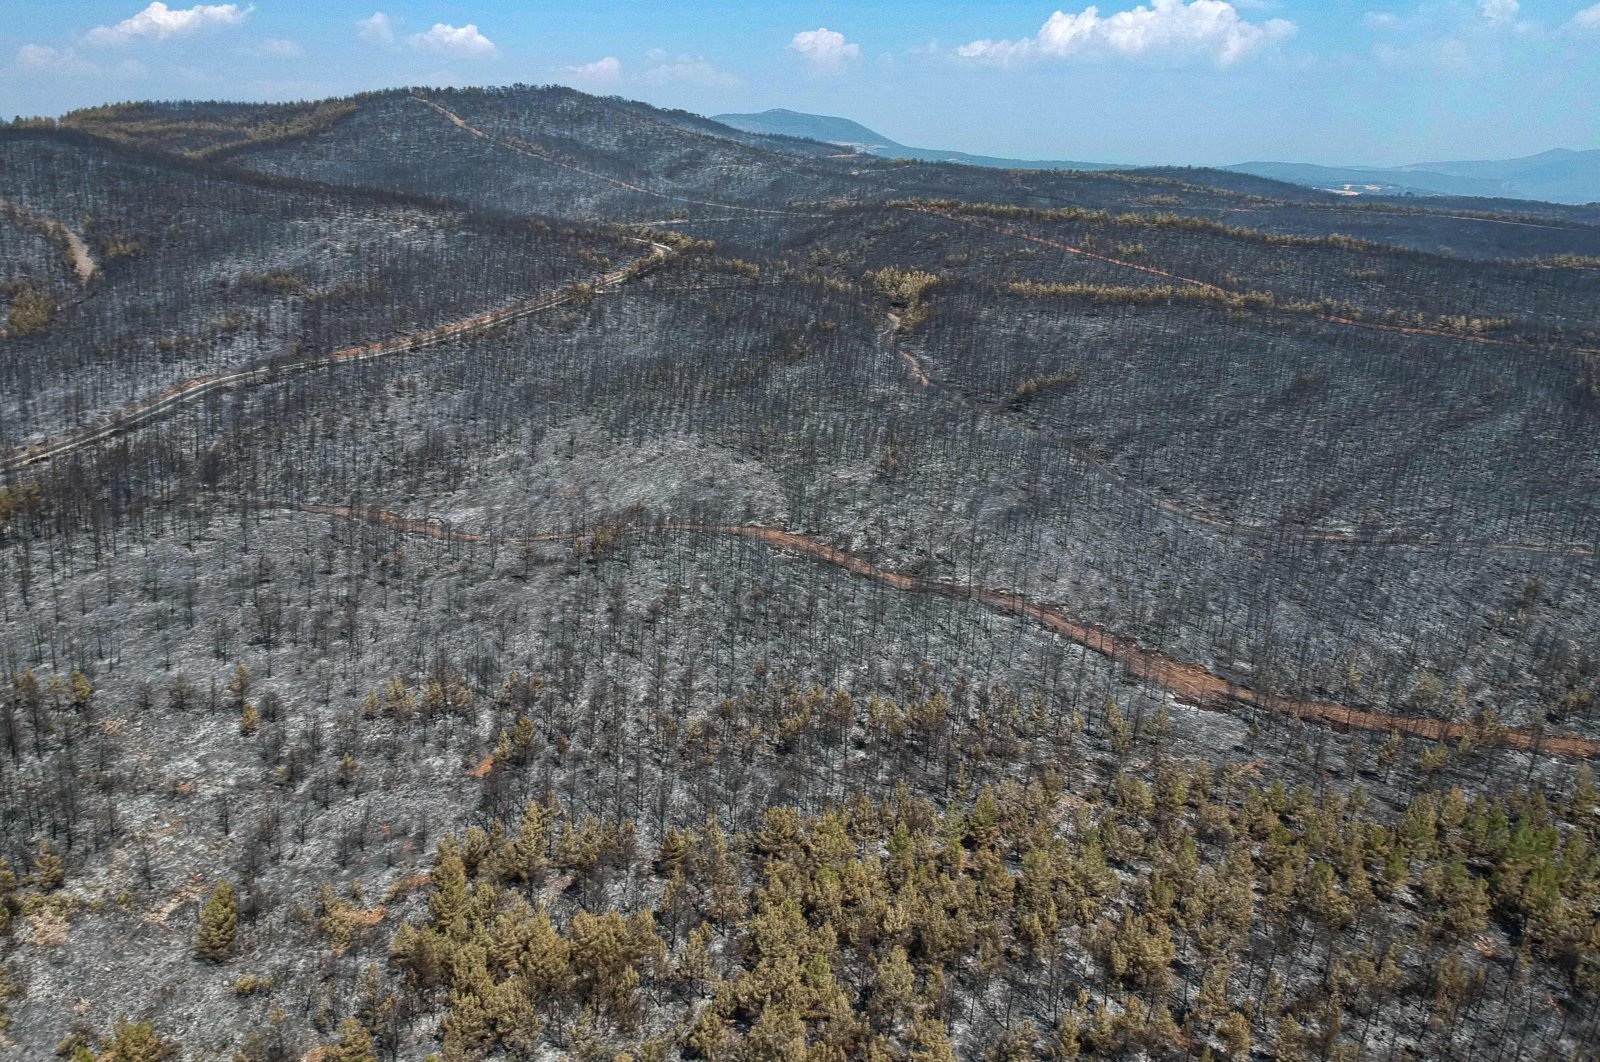 A ravaged area and burnt trees in Muğla district, southern Turkey, Aug. 7, 2021. (AFP Photo)